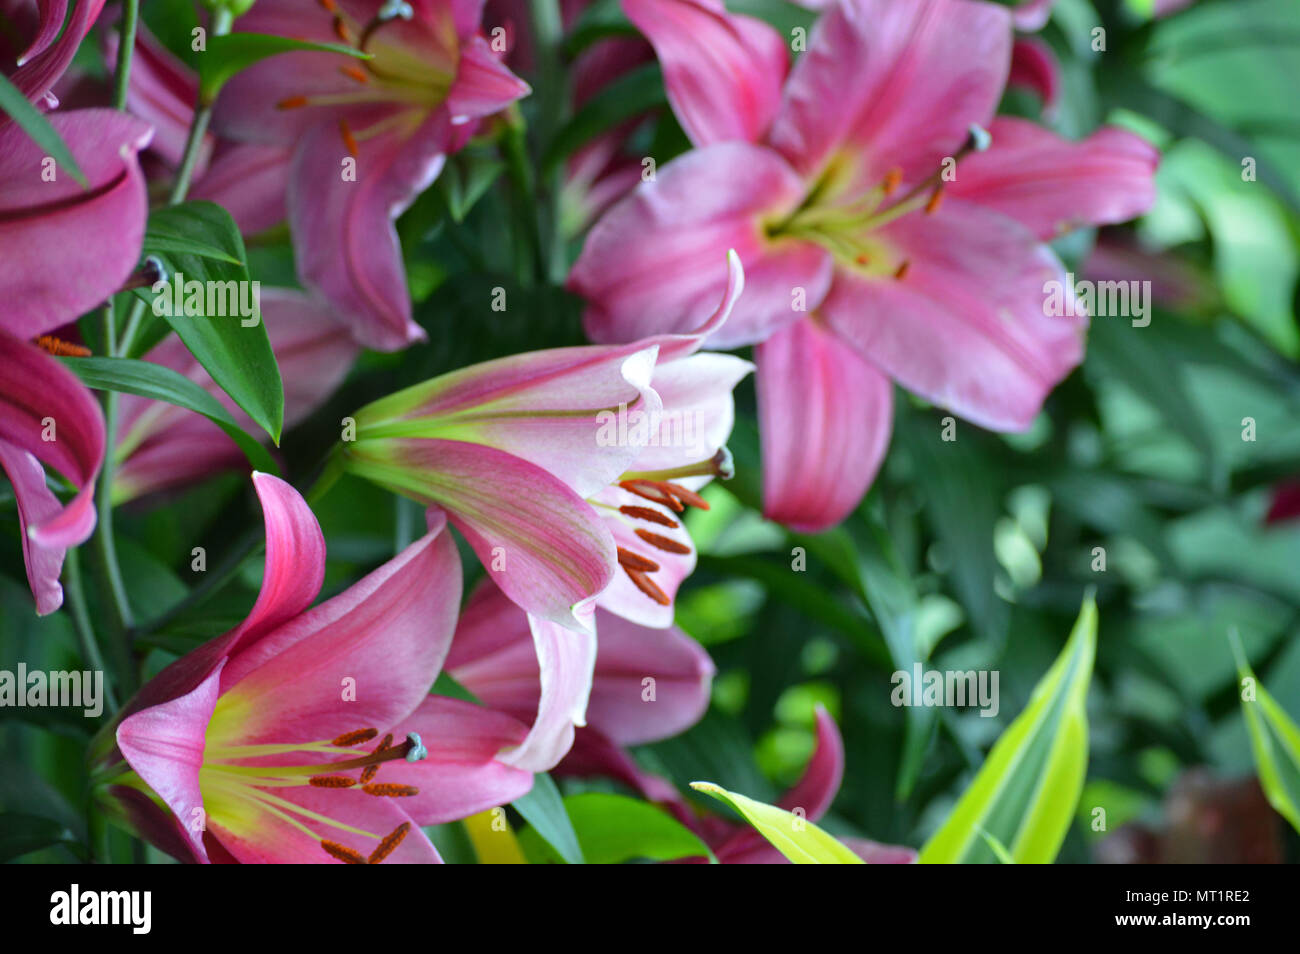 Lily flower blooming in the garden Stock Photo